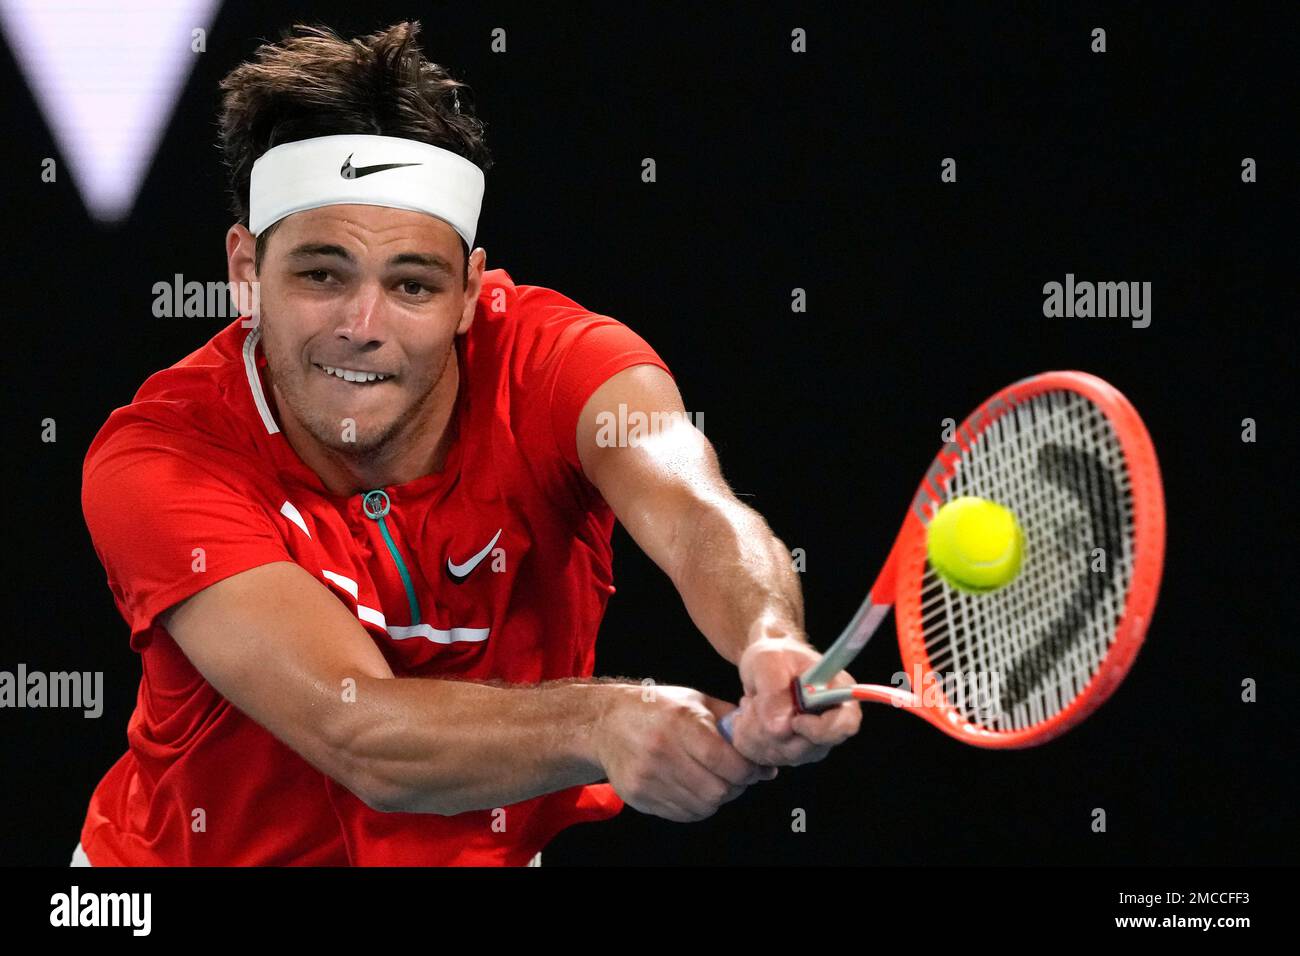 Taylor Fritz of the U.S. makes a backhand return to Stefanos Tsitsipas of Greece during their fourth round match at the Australian Open tennis championships in Melbourne, Australia, Monday, Jan